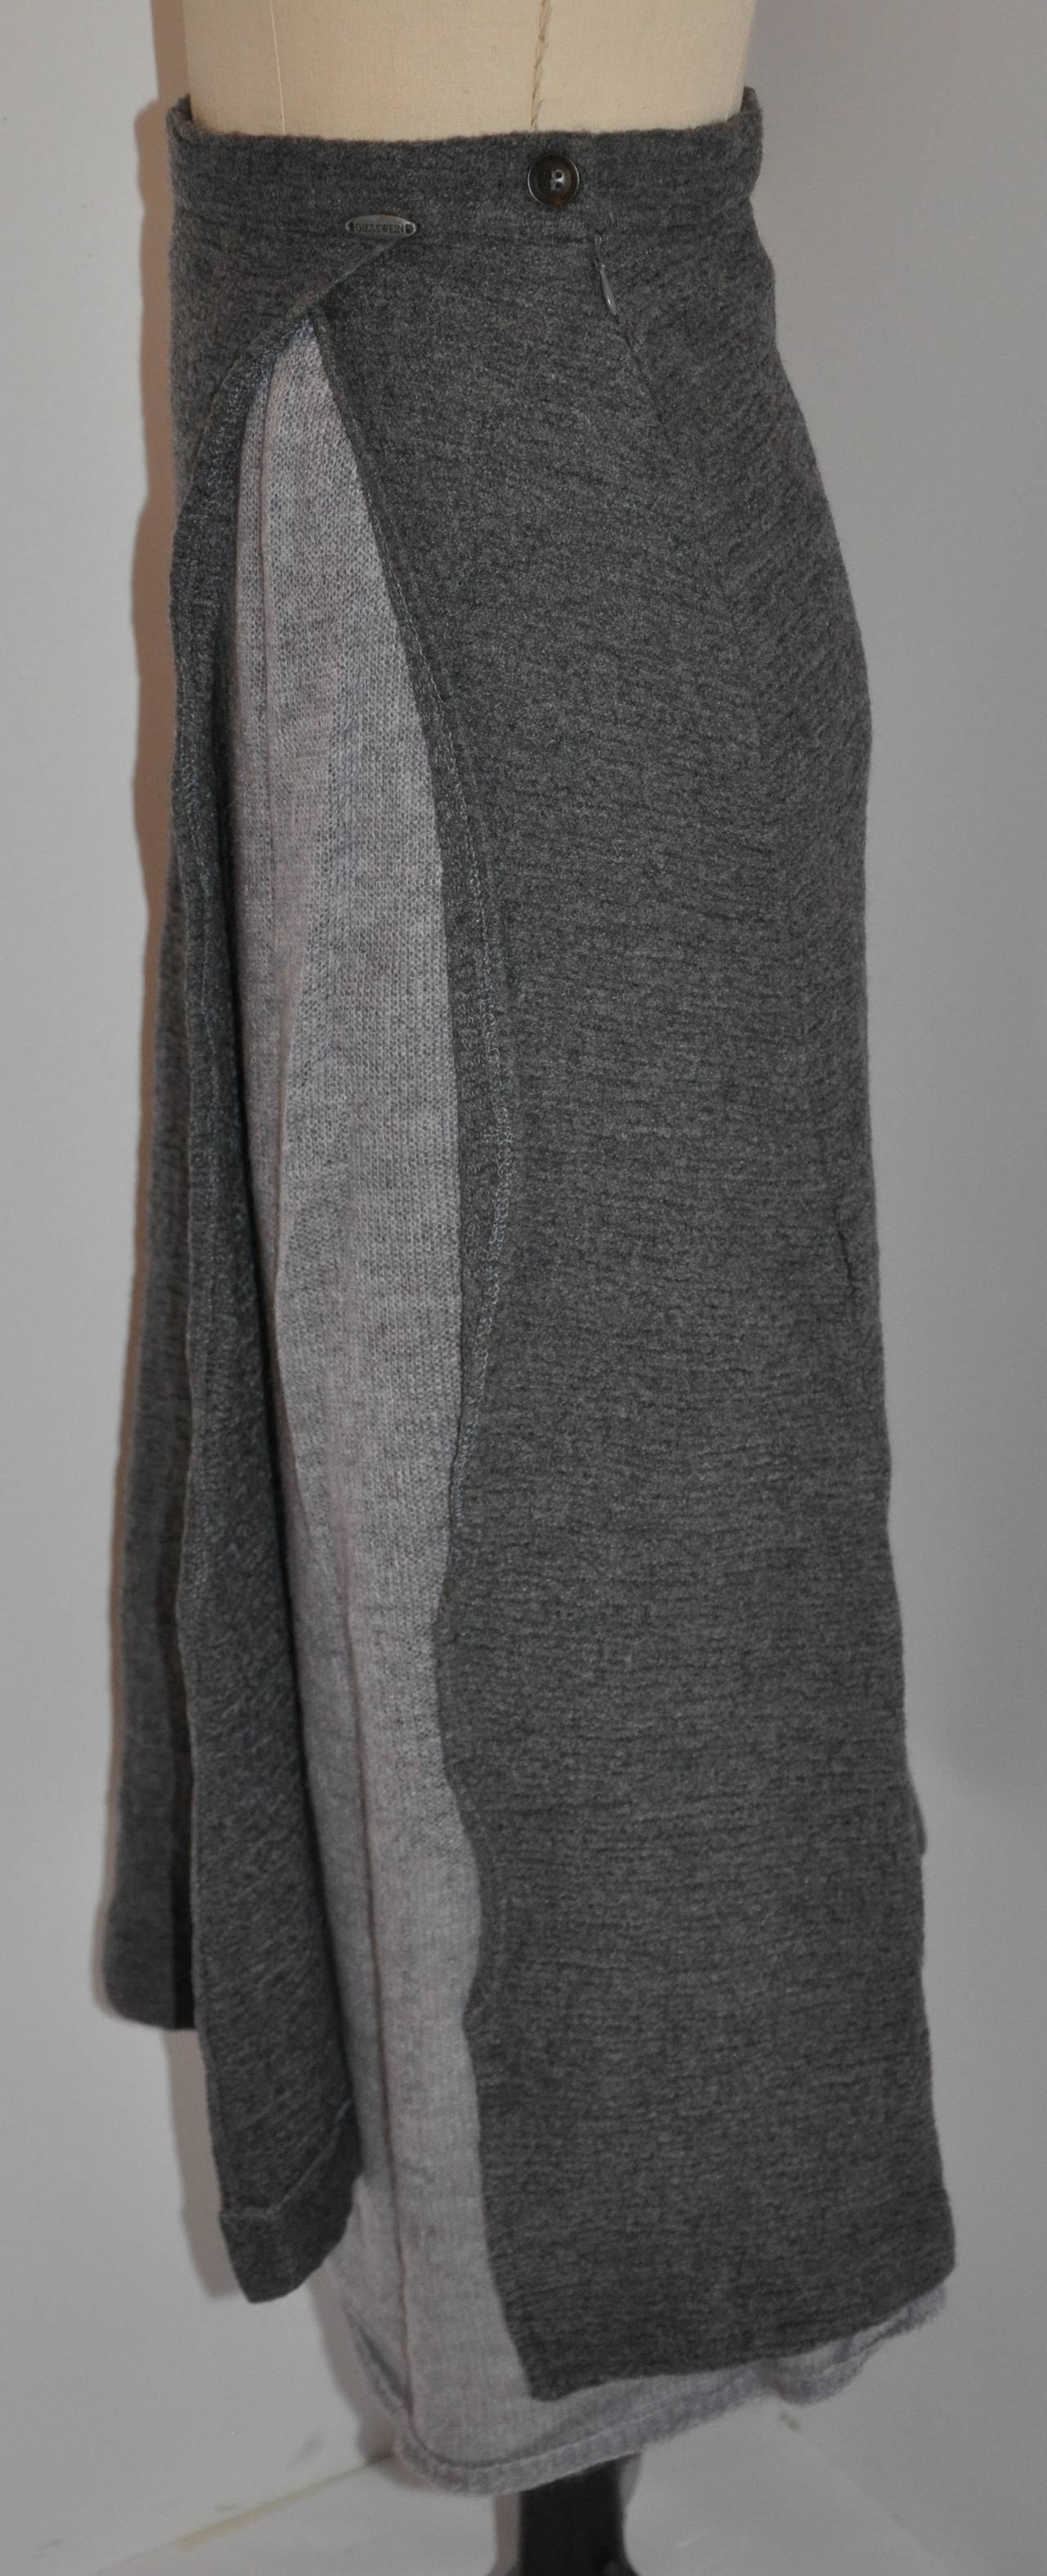 Giesswein of Austria two tone gray wool boucle skirt has a side invisible zipper which measures 8